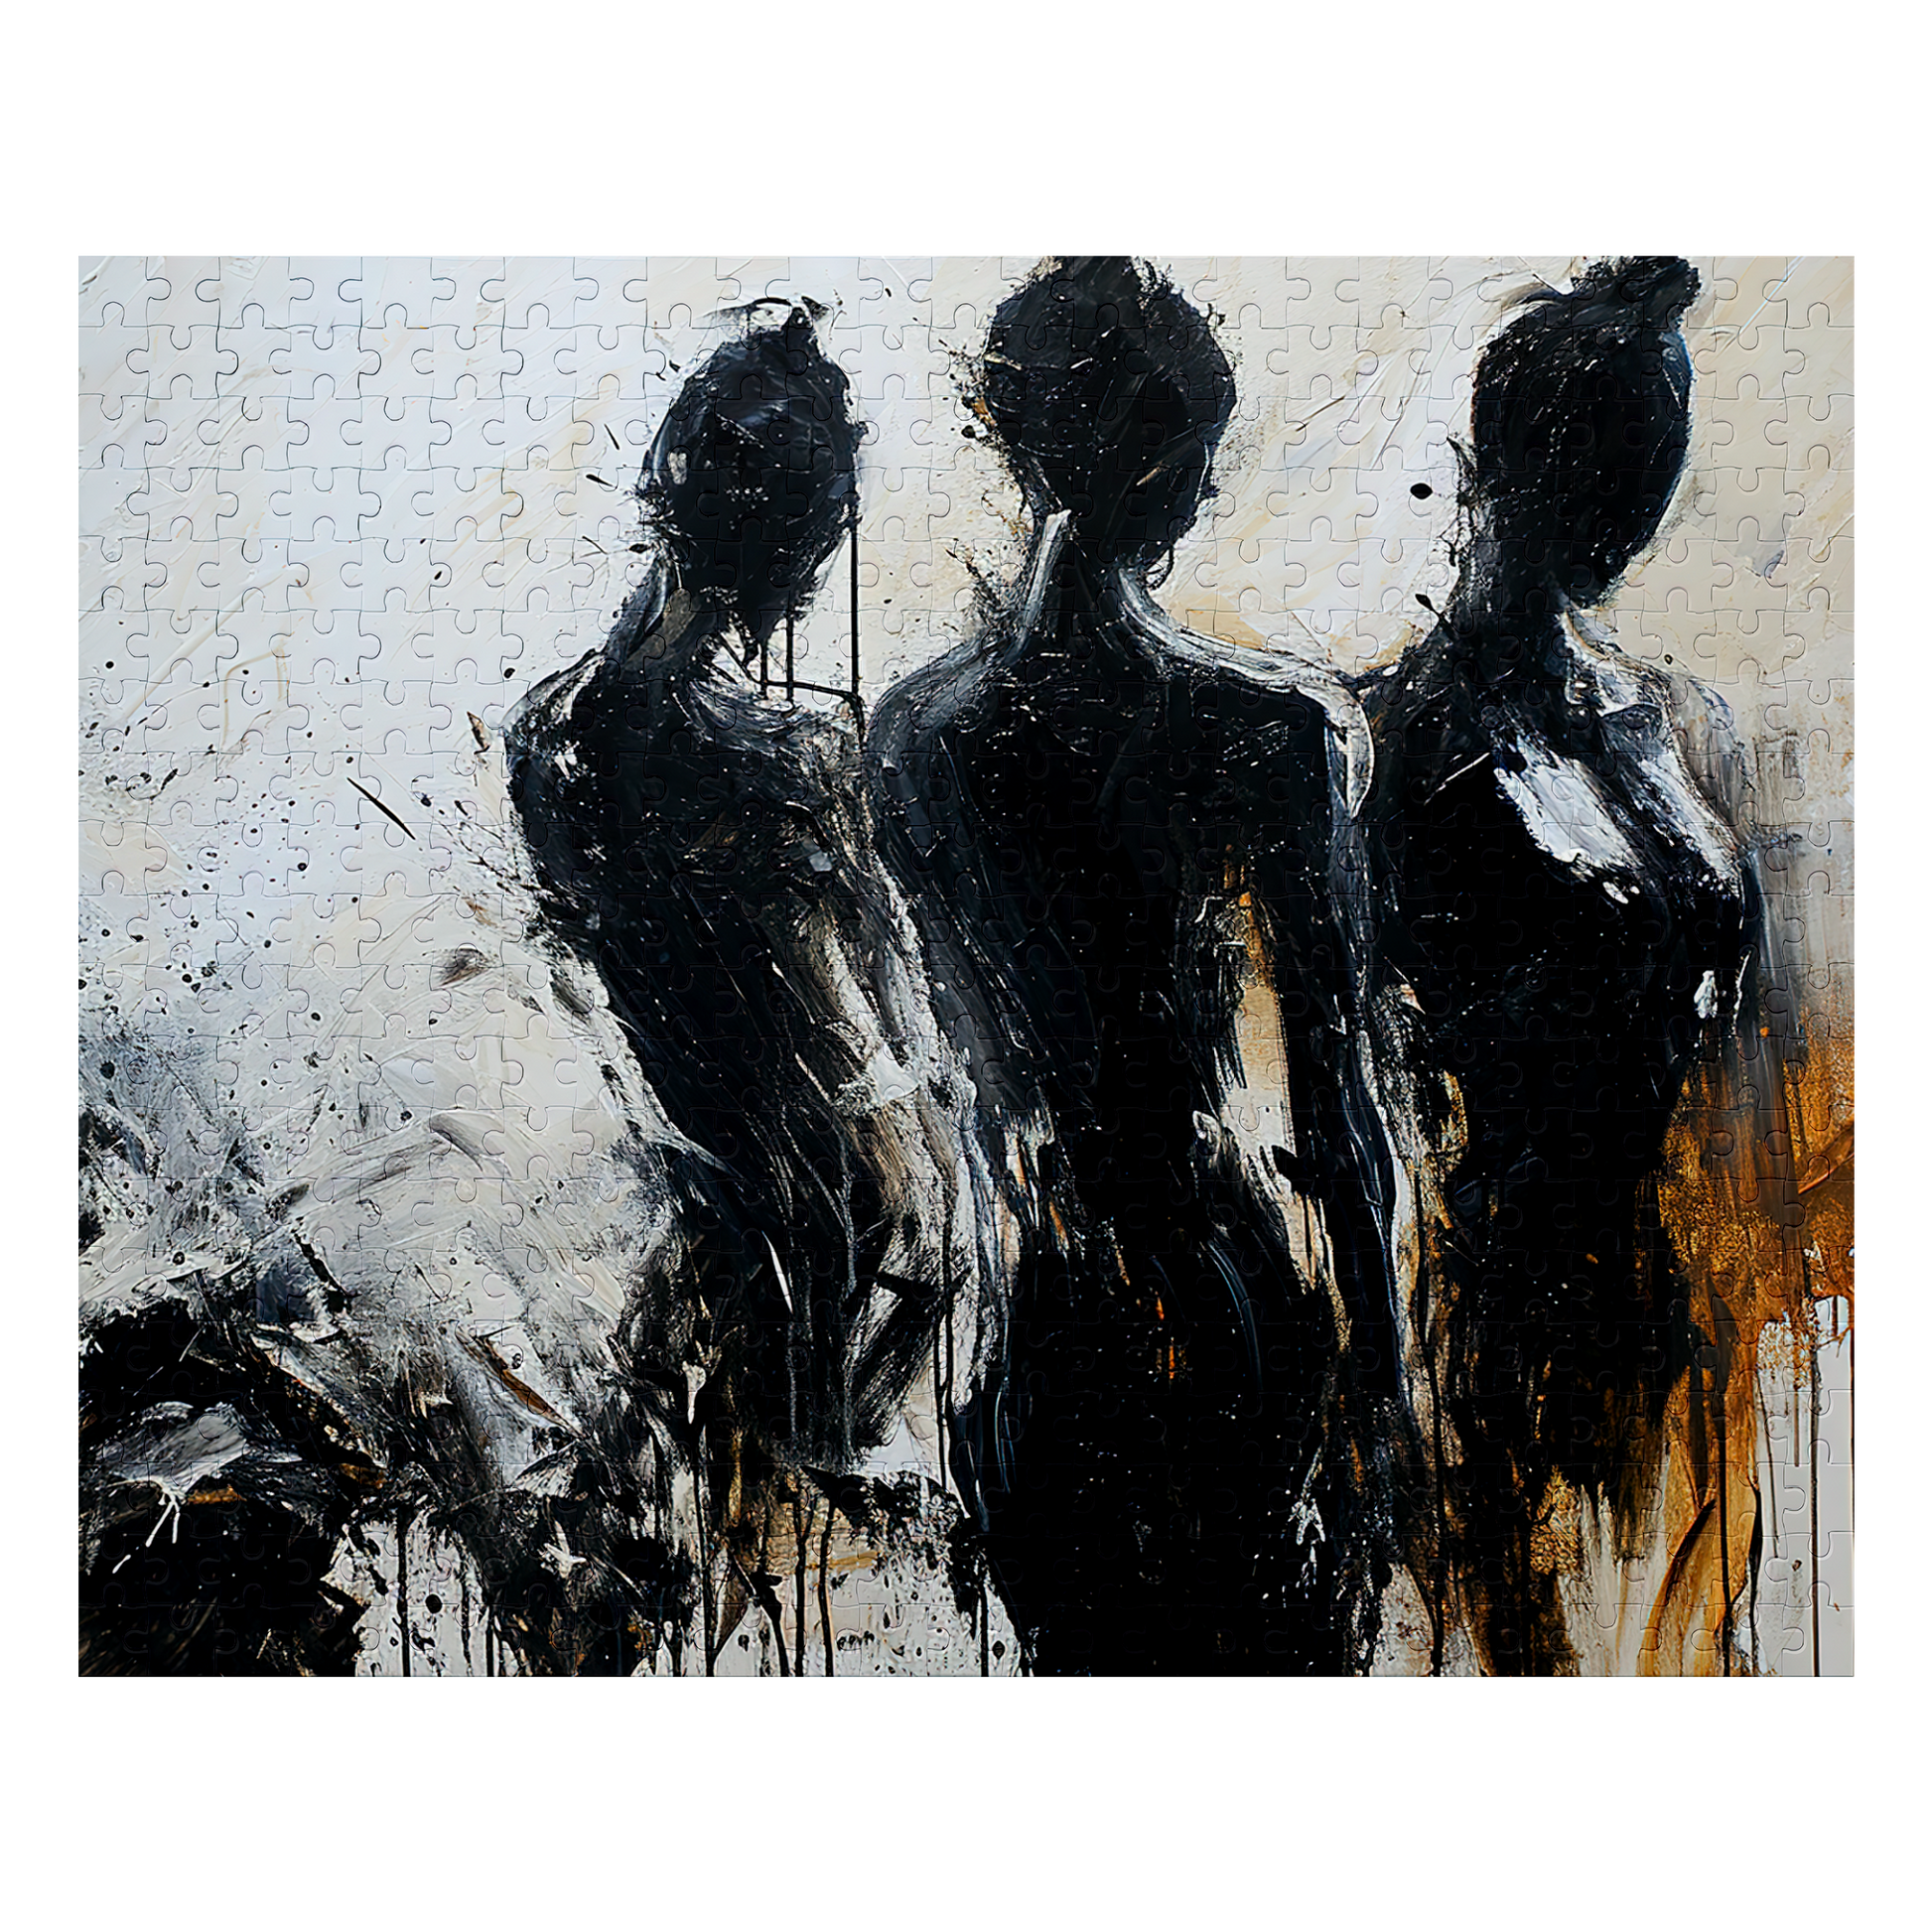 Trio - Premium Jigsaw Puzzle - Abstract, Dynamic, Black and White, Classic - Multiple Sizes Available